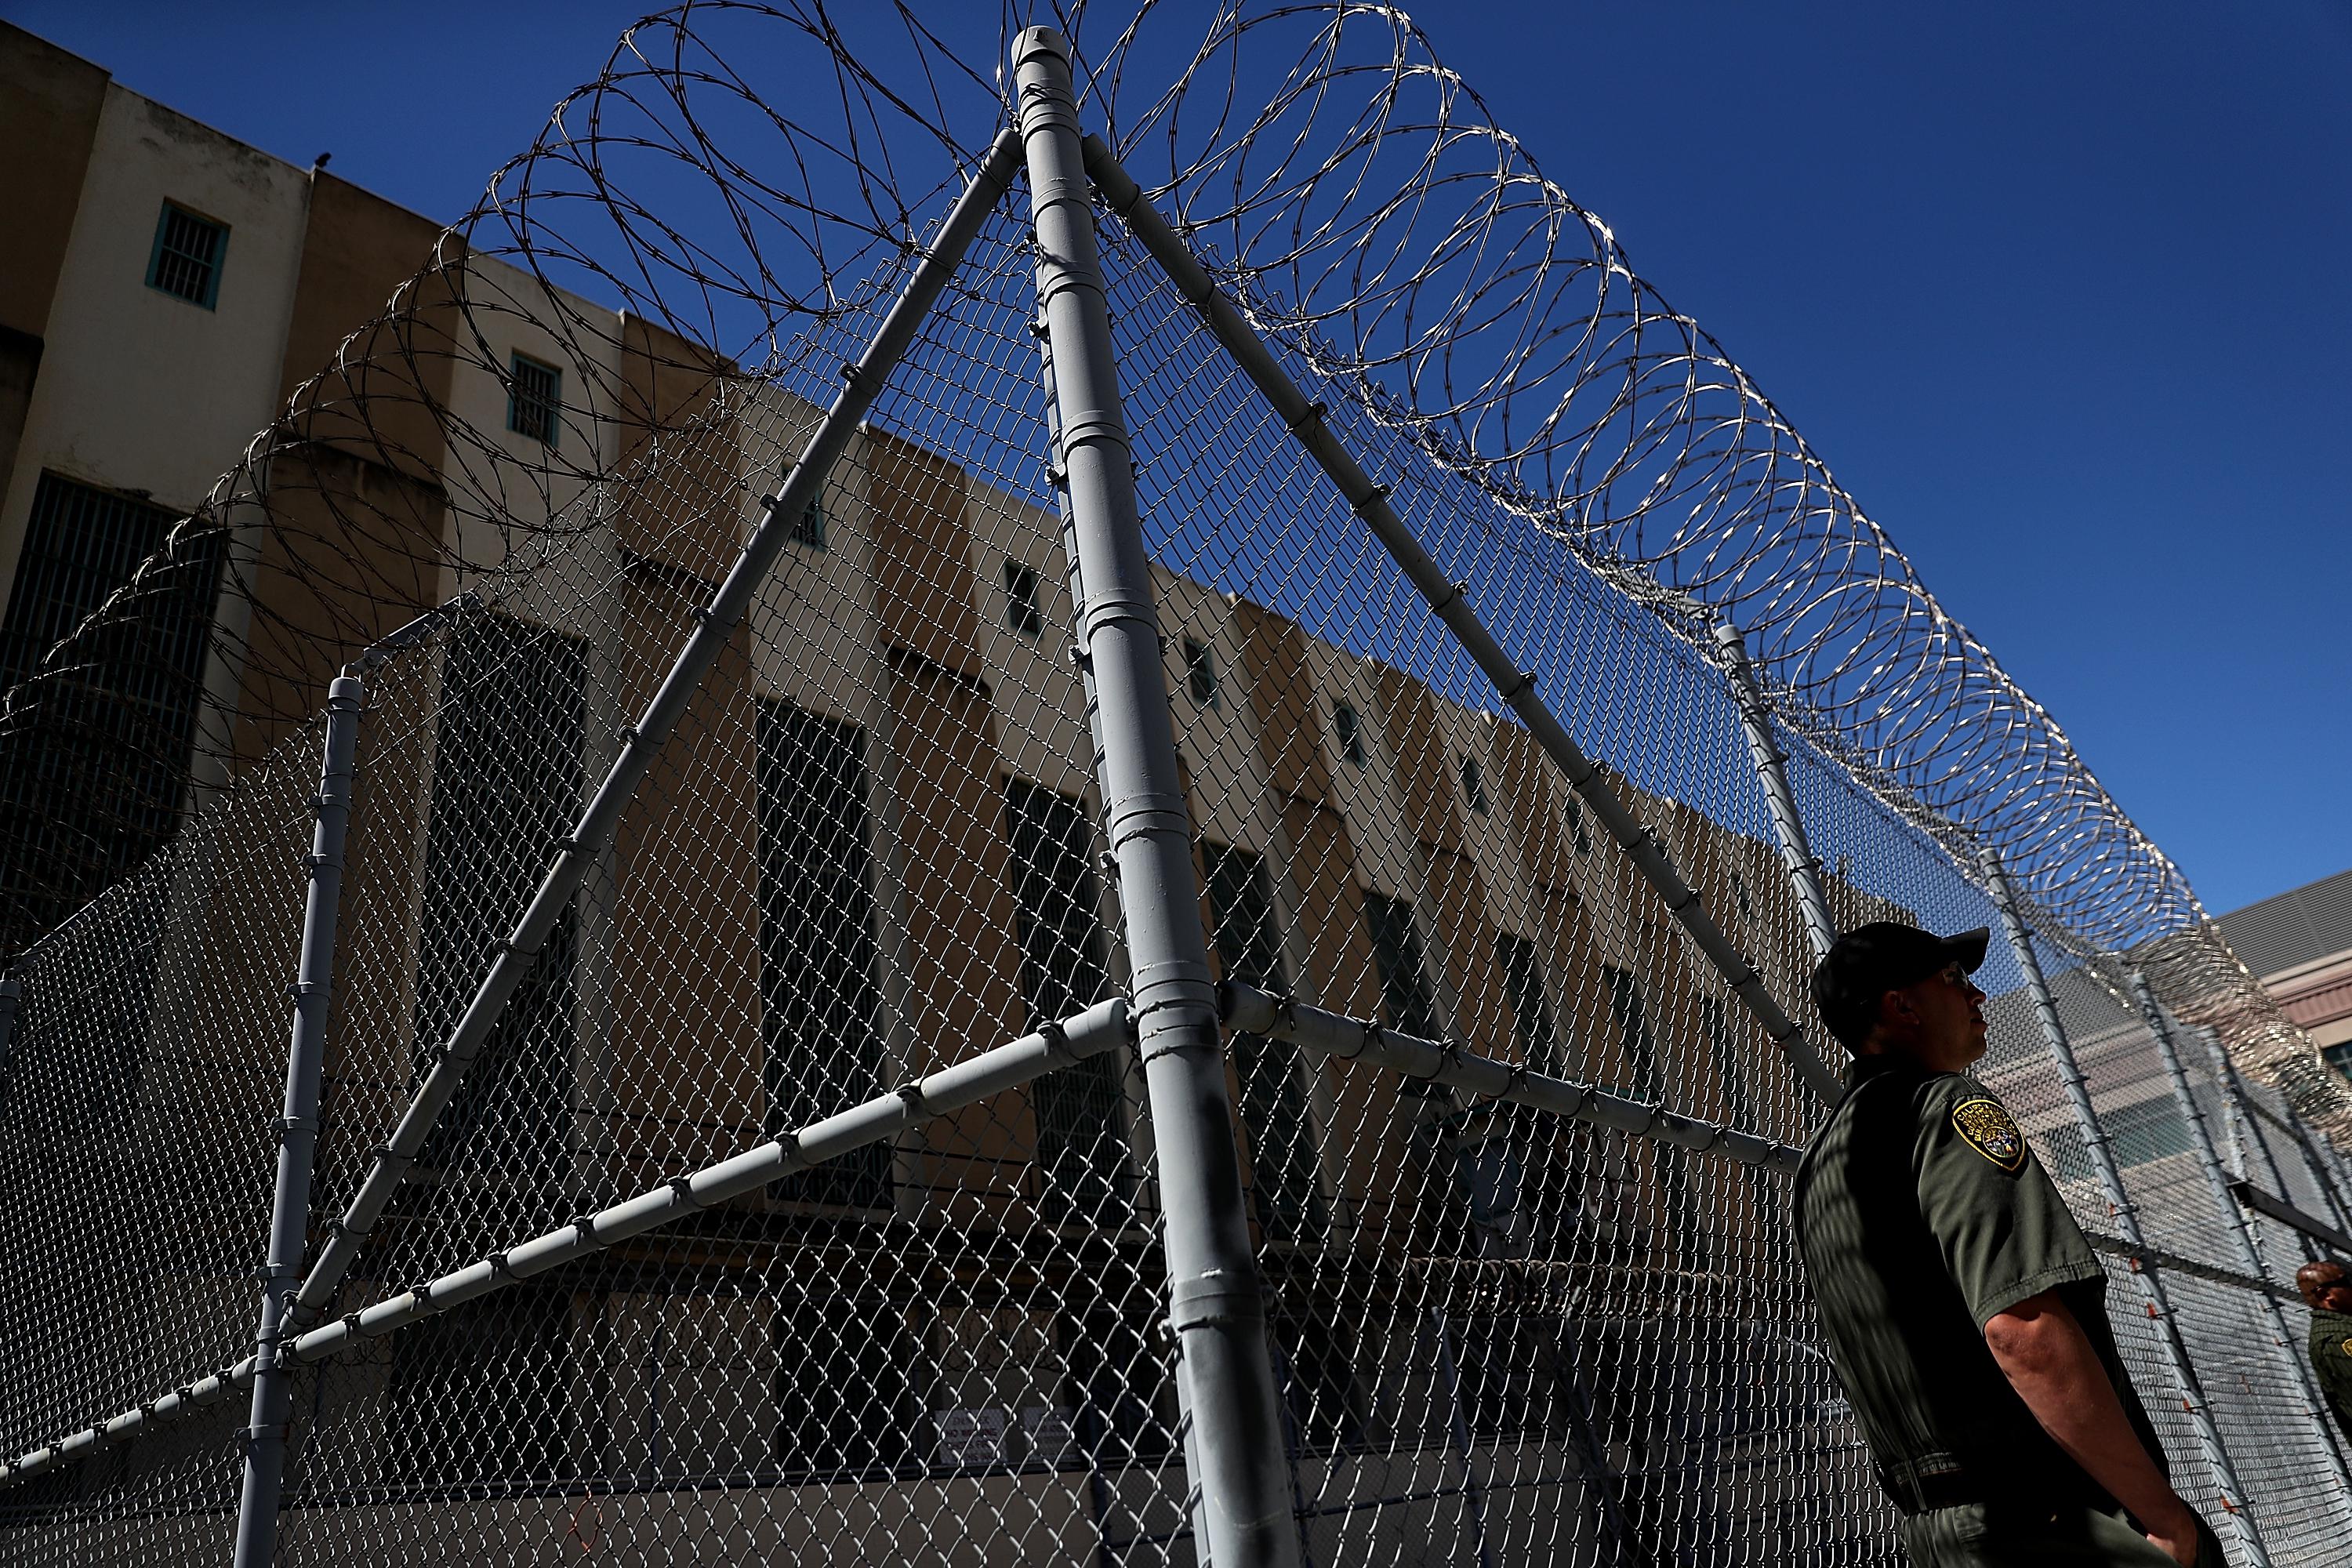 An officer stands guard at San Quentin State Prison on August 15, 2016 in San Quentin, California.